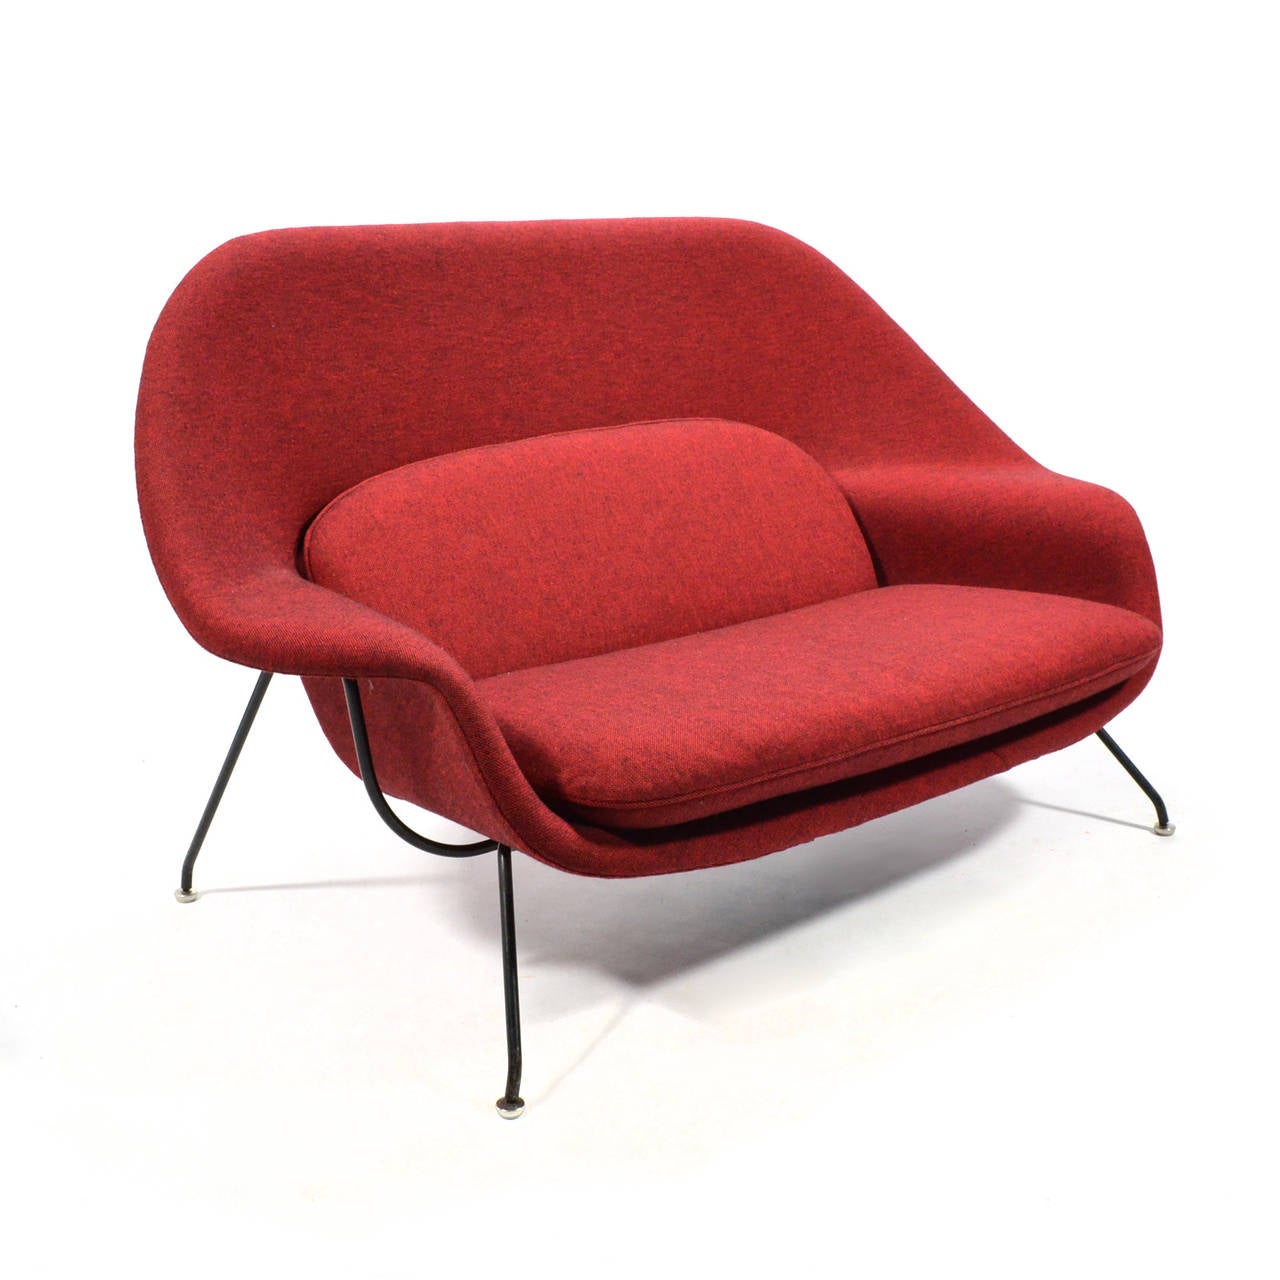 A fantastic example of Eero Saarinen's iconic design in rare large settee or sofa size. Saarinen designed the sofa variation in 1950 to accompany the womb chair. The piece is upholstered in Alexander Girard fabric which is a cross-weave of red and